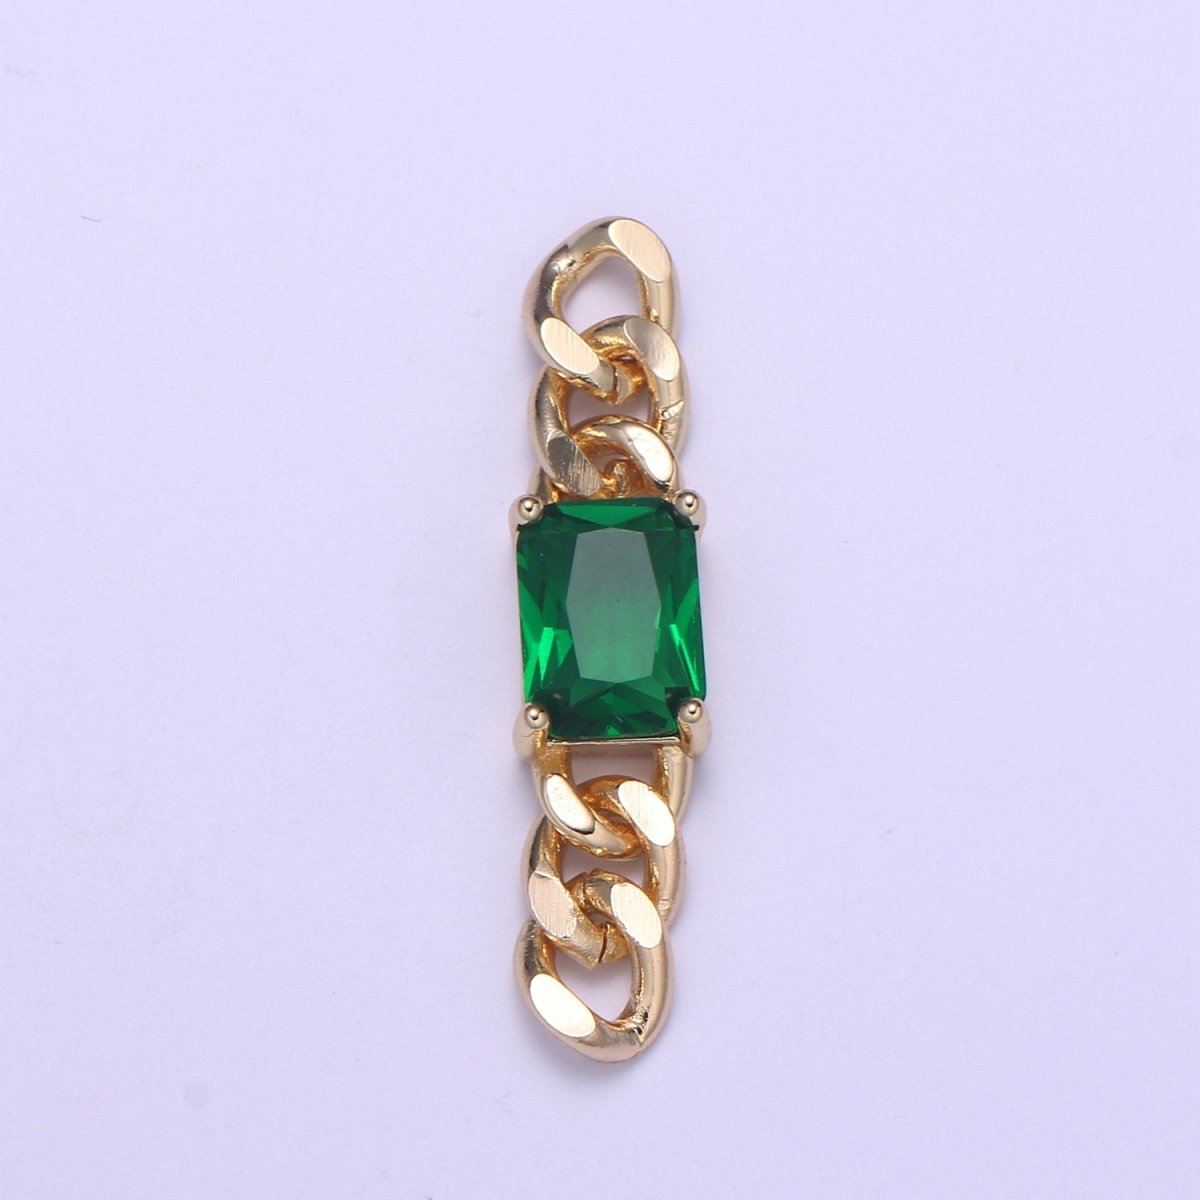 Miami Cuban Link Connector for Bracelet Necklace Jewelry Making Supply Emerald Green Cubic Charm Connector for Statement Jewelry Making F-677 - DLUXCA